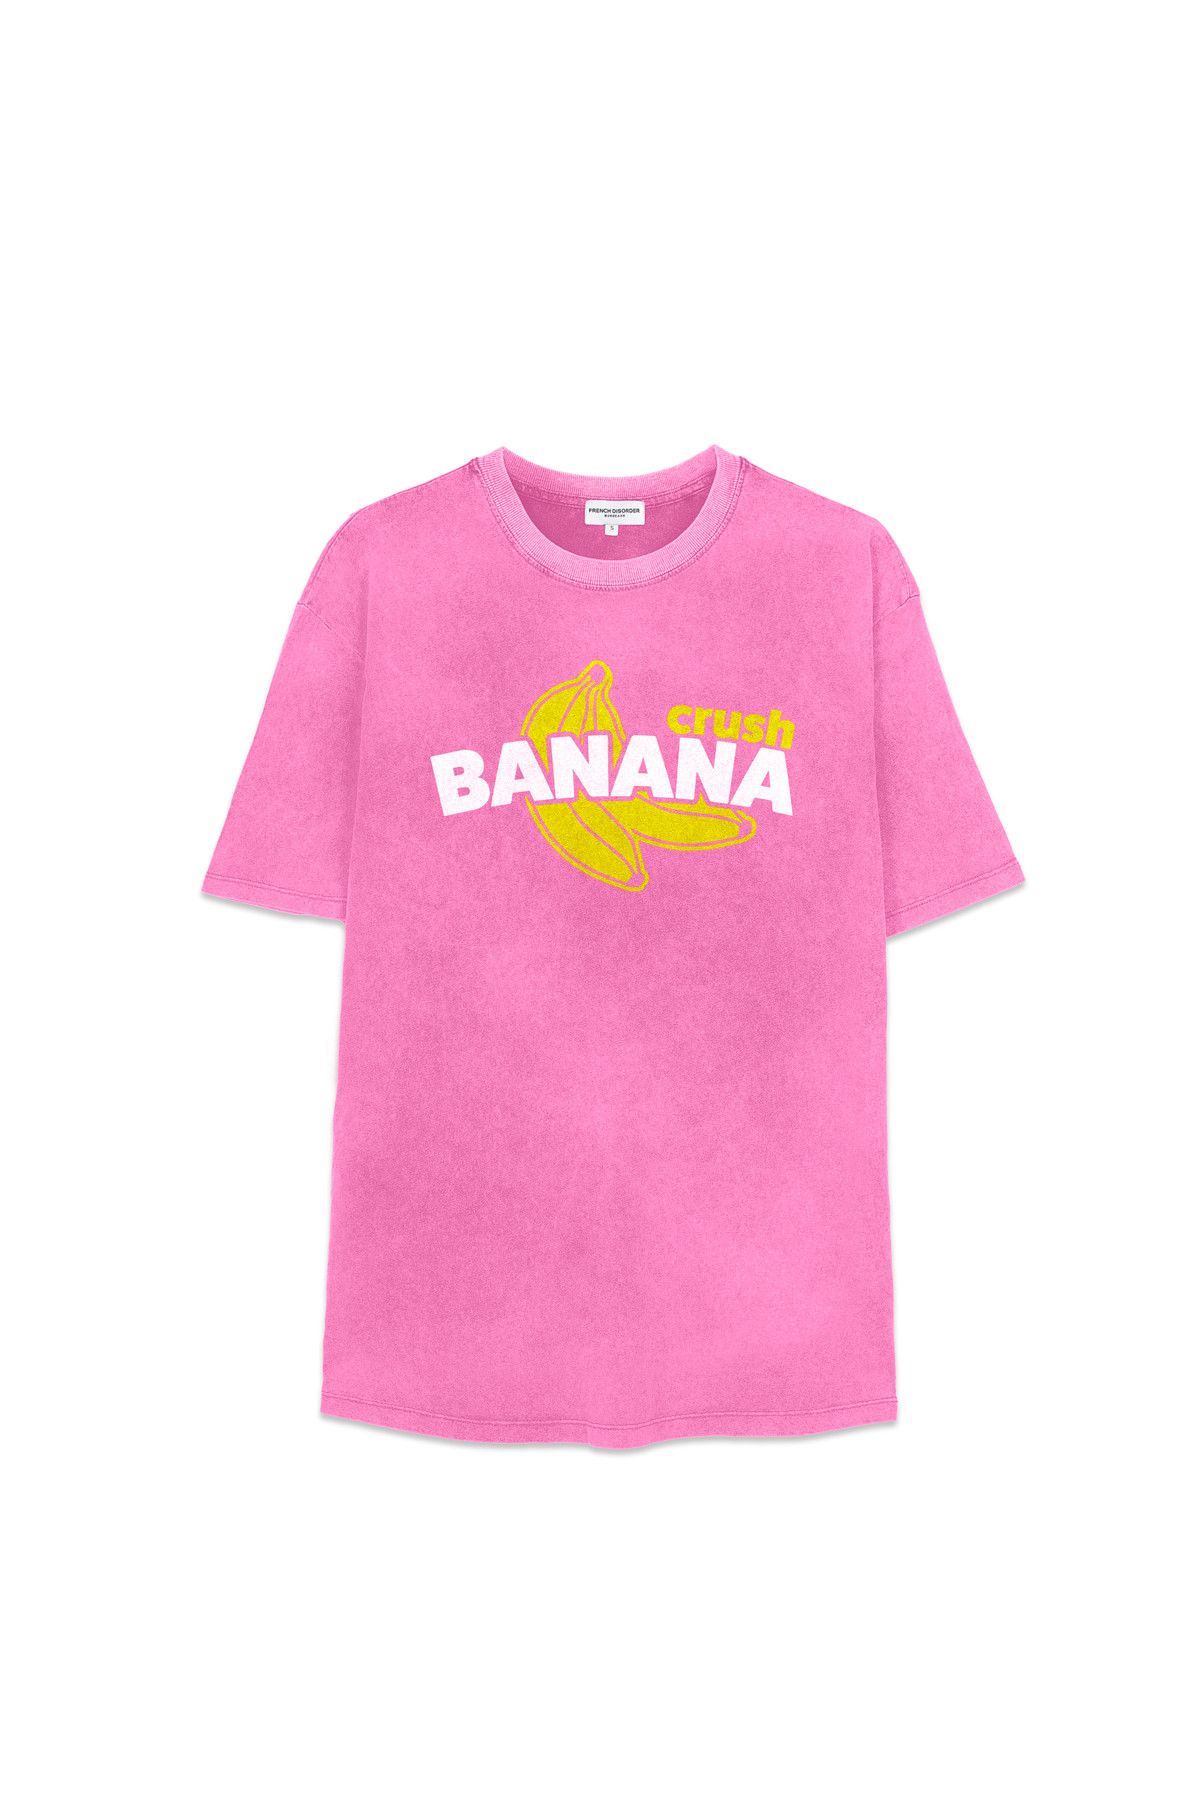 Photo de T-SHIRTS COL ROND Tshirt FEMME Washed BANANA chez French Disorder